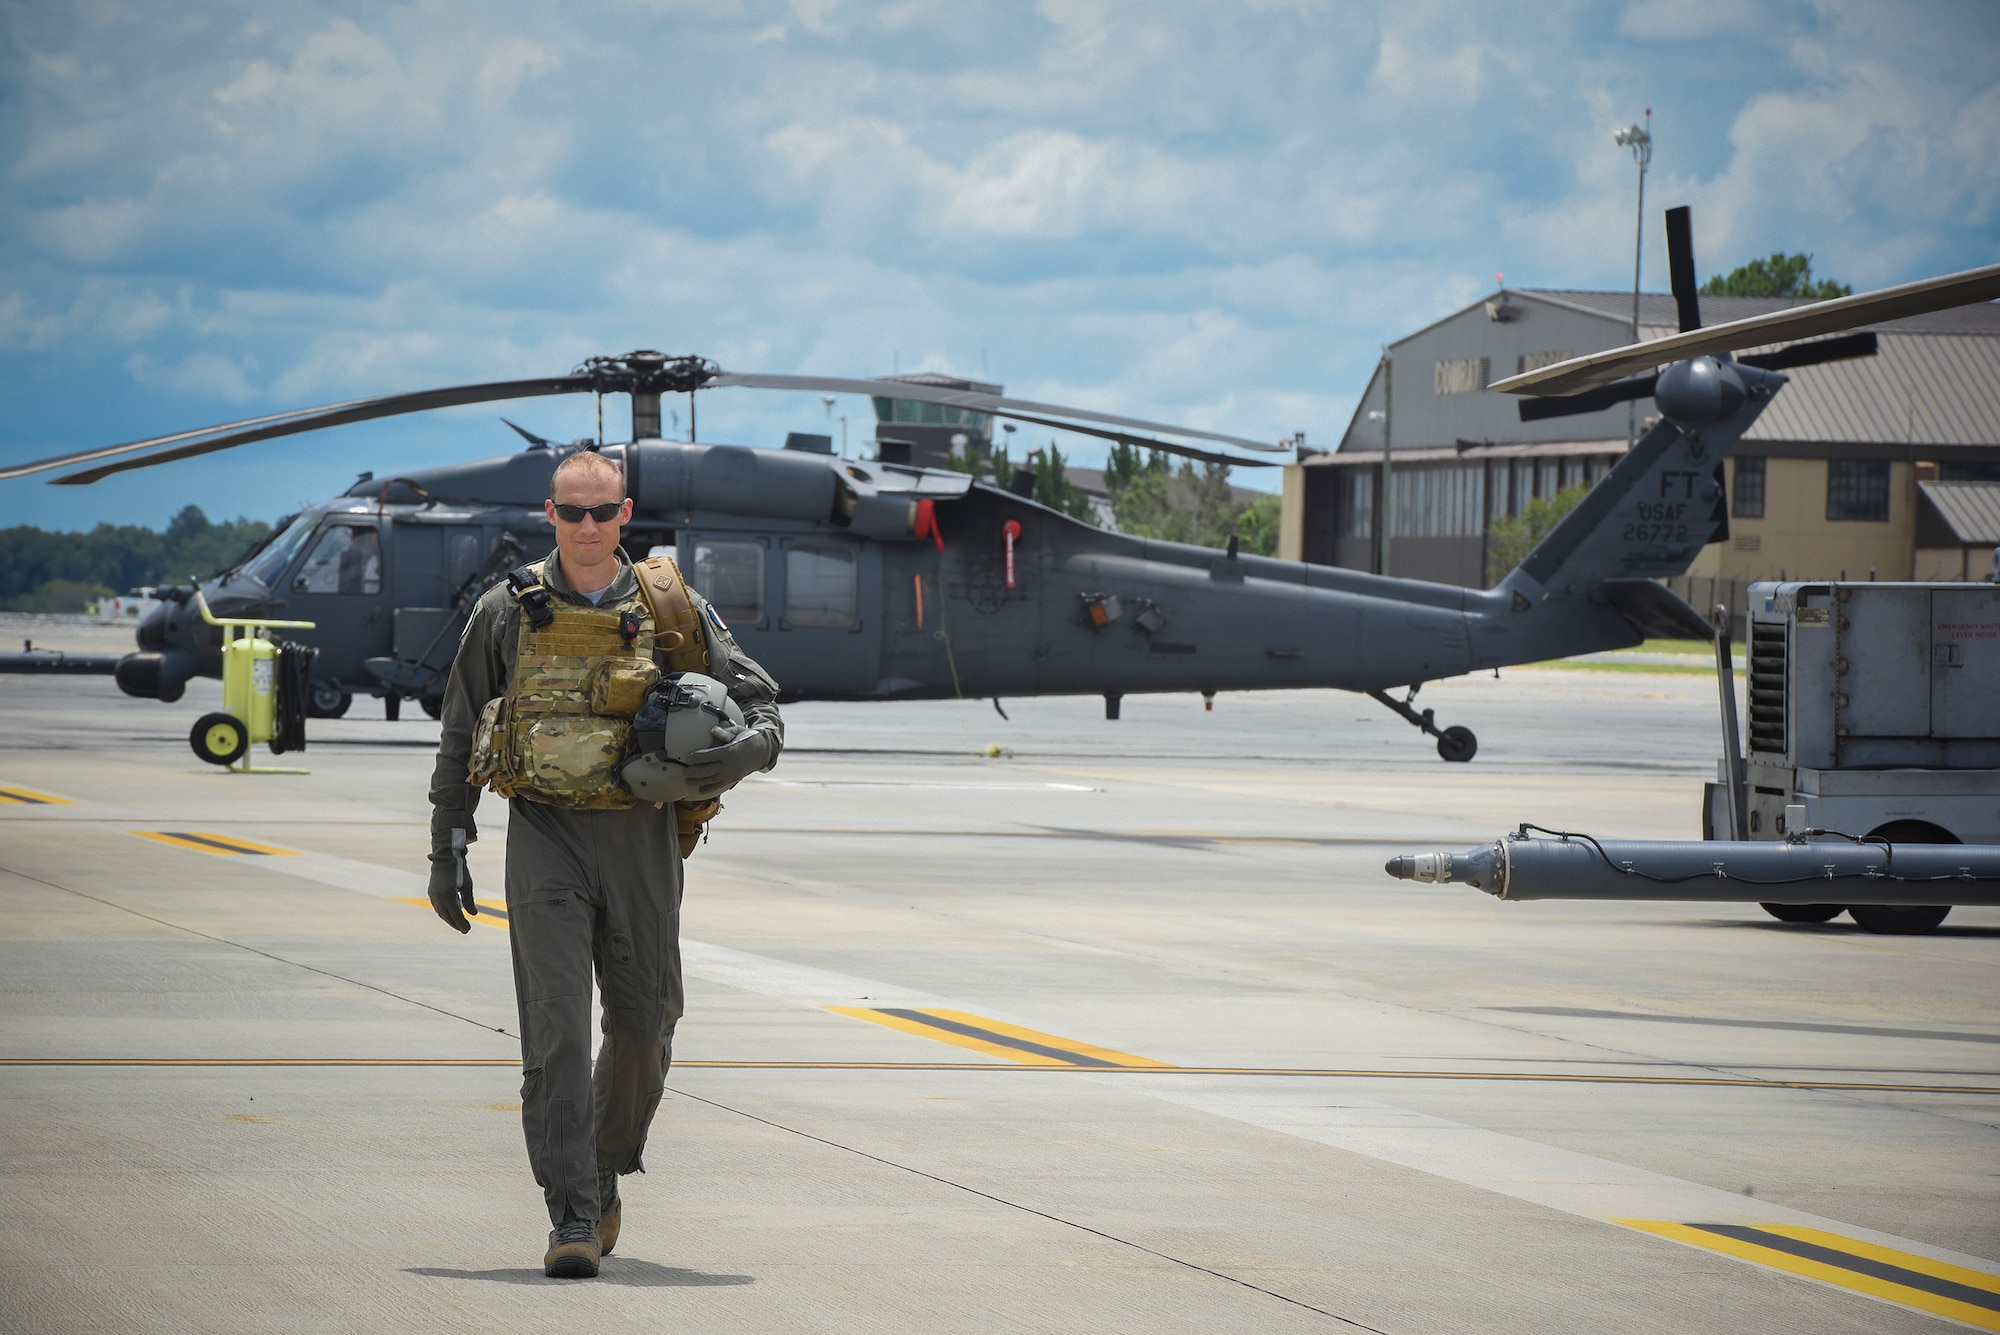 Commandant Micka, a French exchange pilot and assistant director of operations for Moody’s 41st Rescue Squadron, walks on the flightline past an HH-60G Pavehawk, Aug. 2, 2017, at Moody Air Force Base, Ga. Prior to his arrival at the 41st RQS, Micka transitioned from flying the French Air Force’s EC-725 Caracal helicopter to learn the HH-60. Since his childhood, Micka aspired to serve and fly for the French and U.S. military as a rescue pilot. (U.S. Air Force photo by Senior Airman Greg Nash)